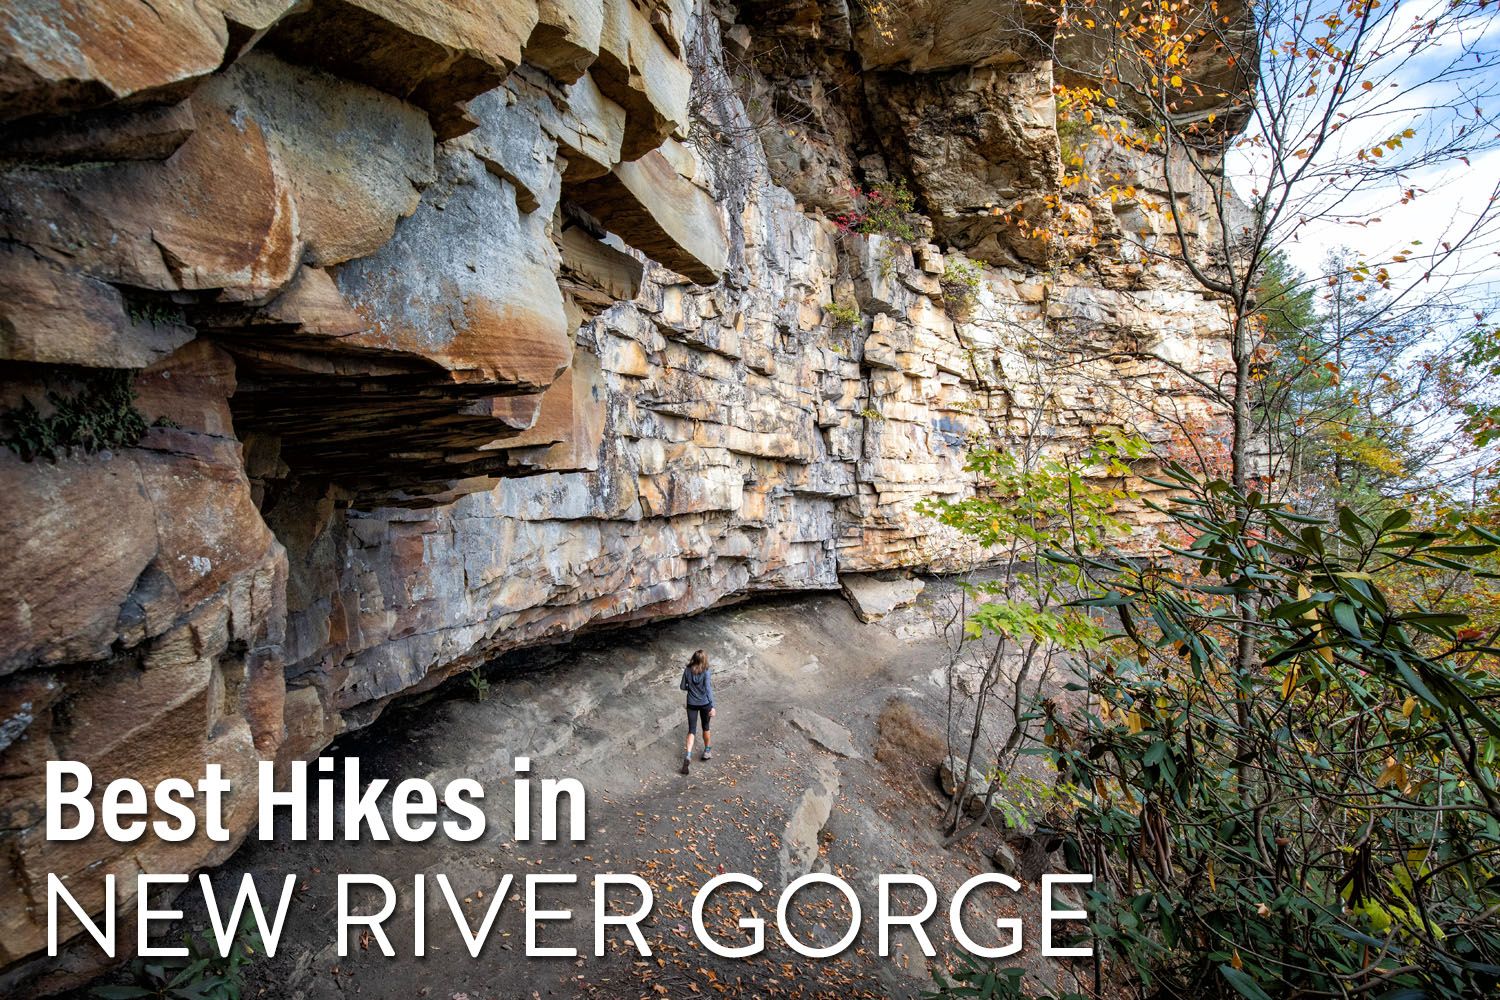 Hikes in New River Gorge